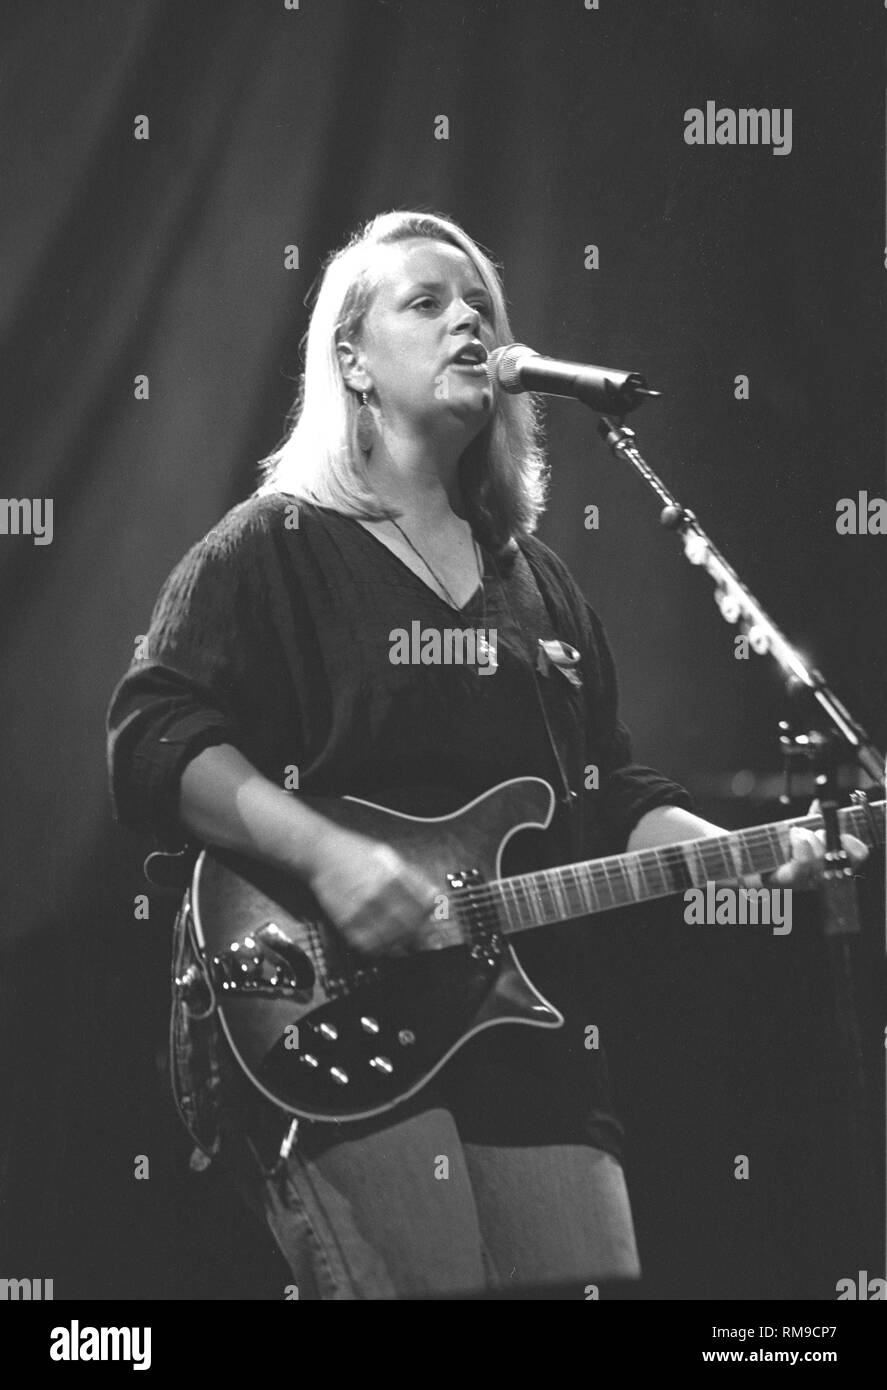 Country music artist Mary Chapin Carpenter is shown playing guitar and singing on stage during a 'live' concert appearance. Stock Photo